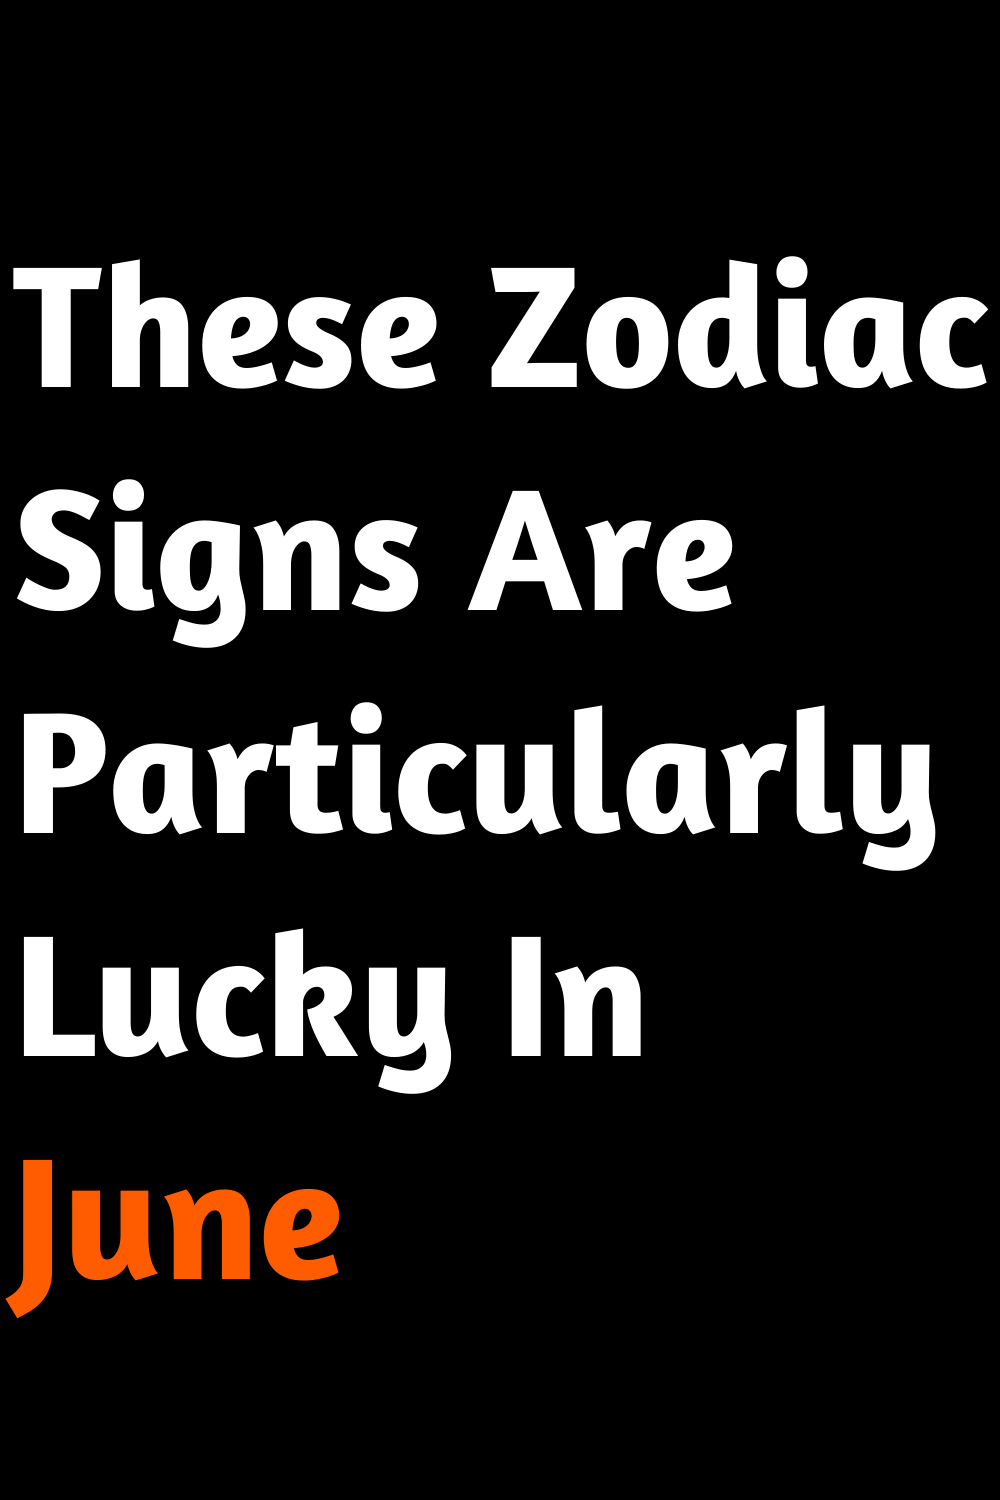 These Zodiac Signs Are Particularly Lucky In June